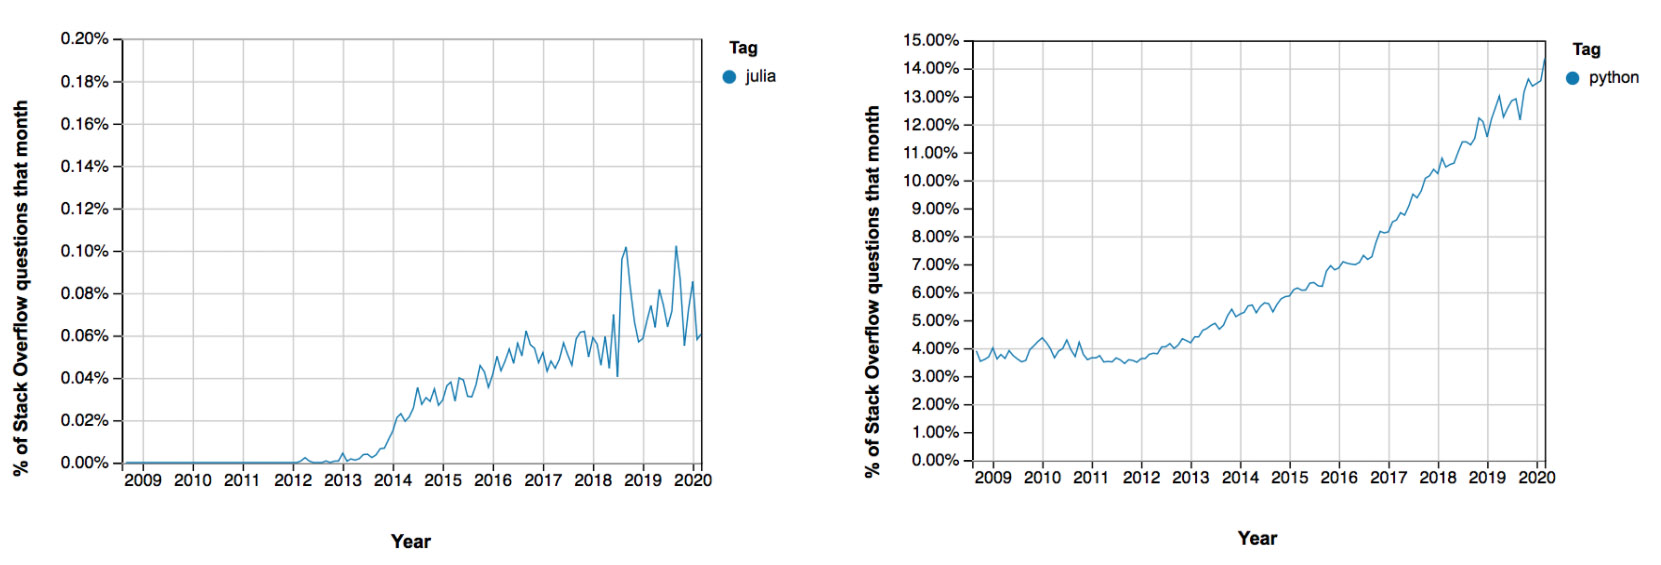 The number of questions tagged Julia (left) and Python (right) on StackOverflow